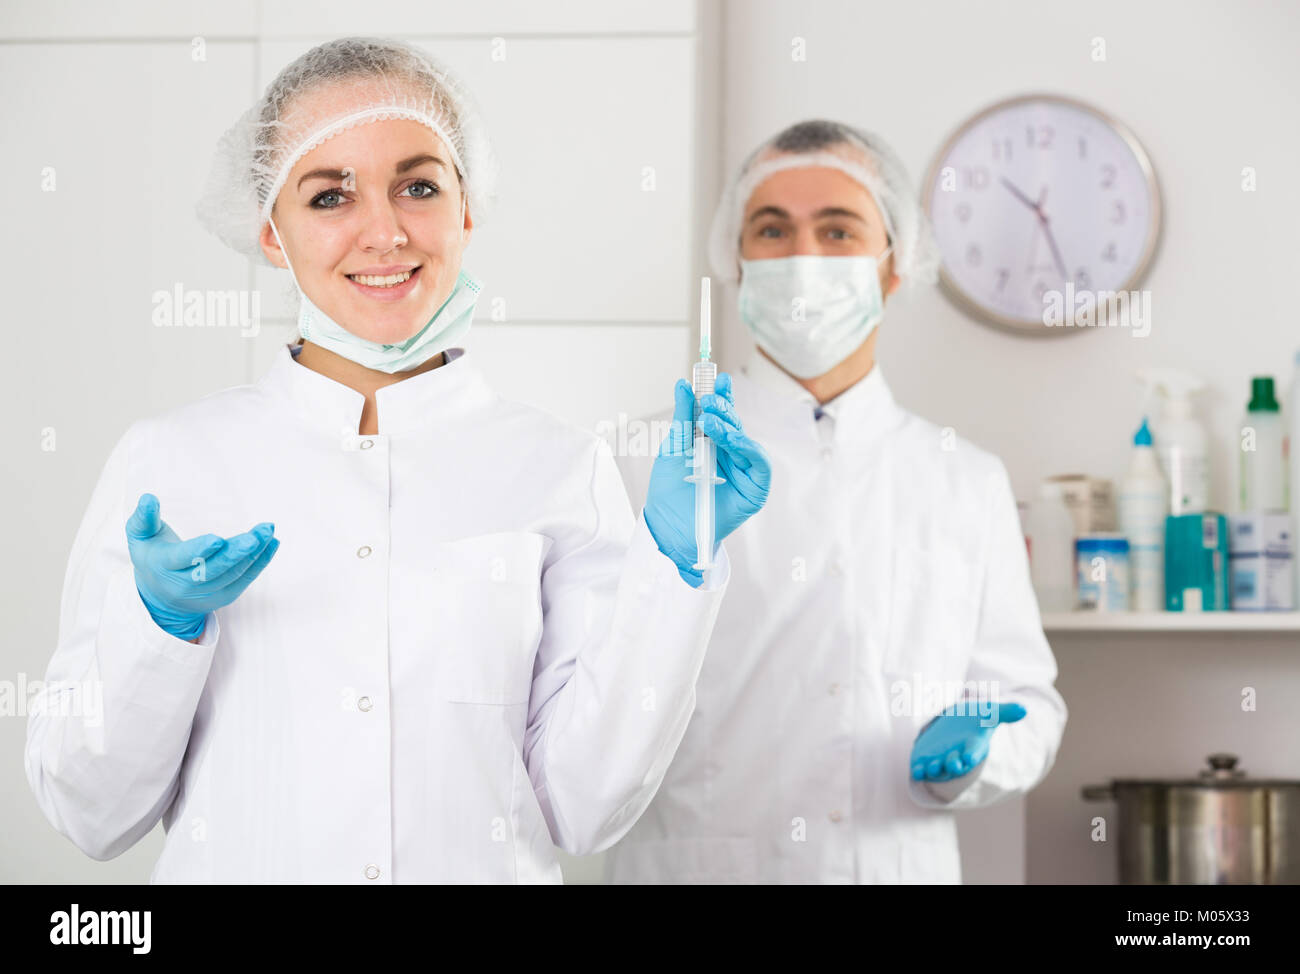 Smiling woman nurse and man doctor ready to work in office Stock Photo